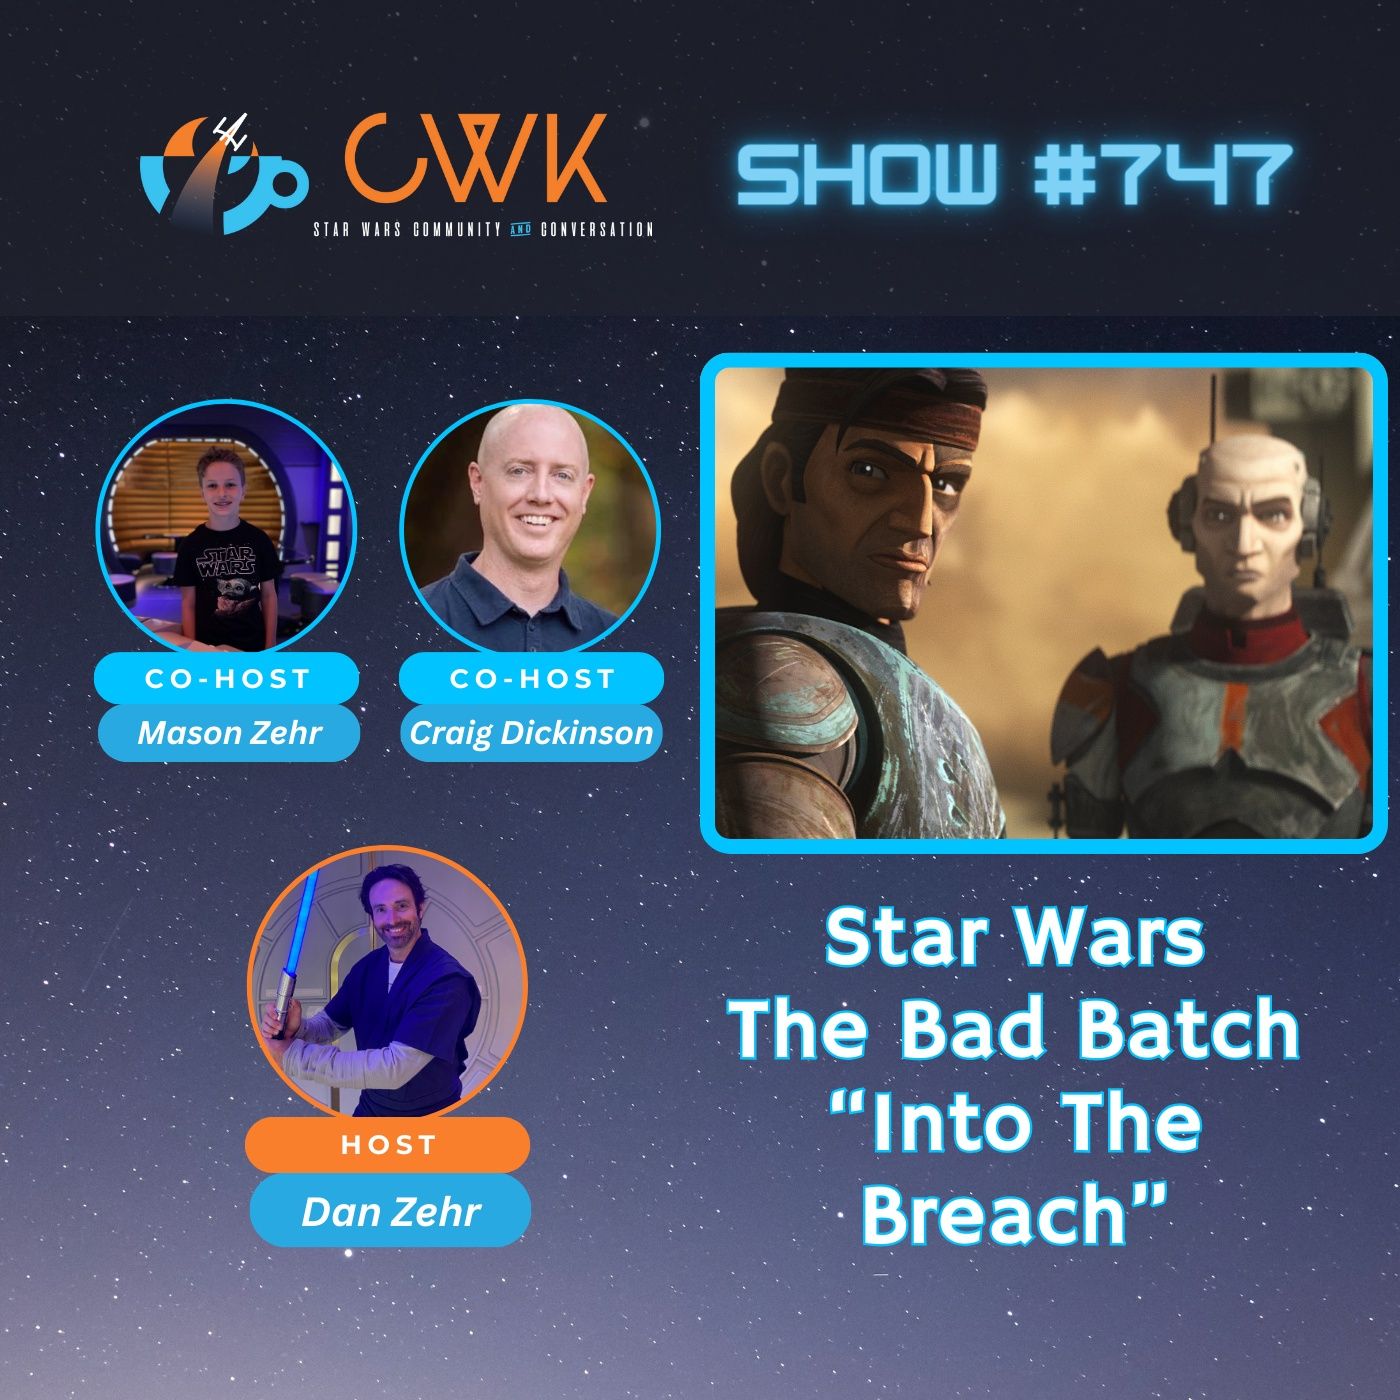 CWK Show #747: The Bad Batch- “Into The Breach